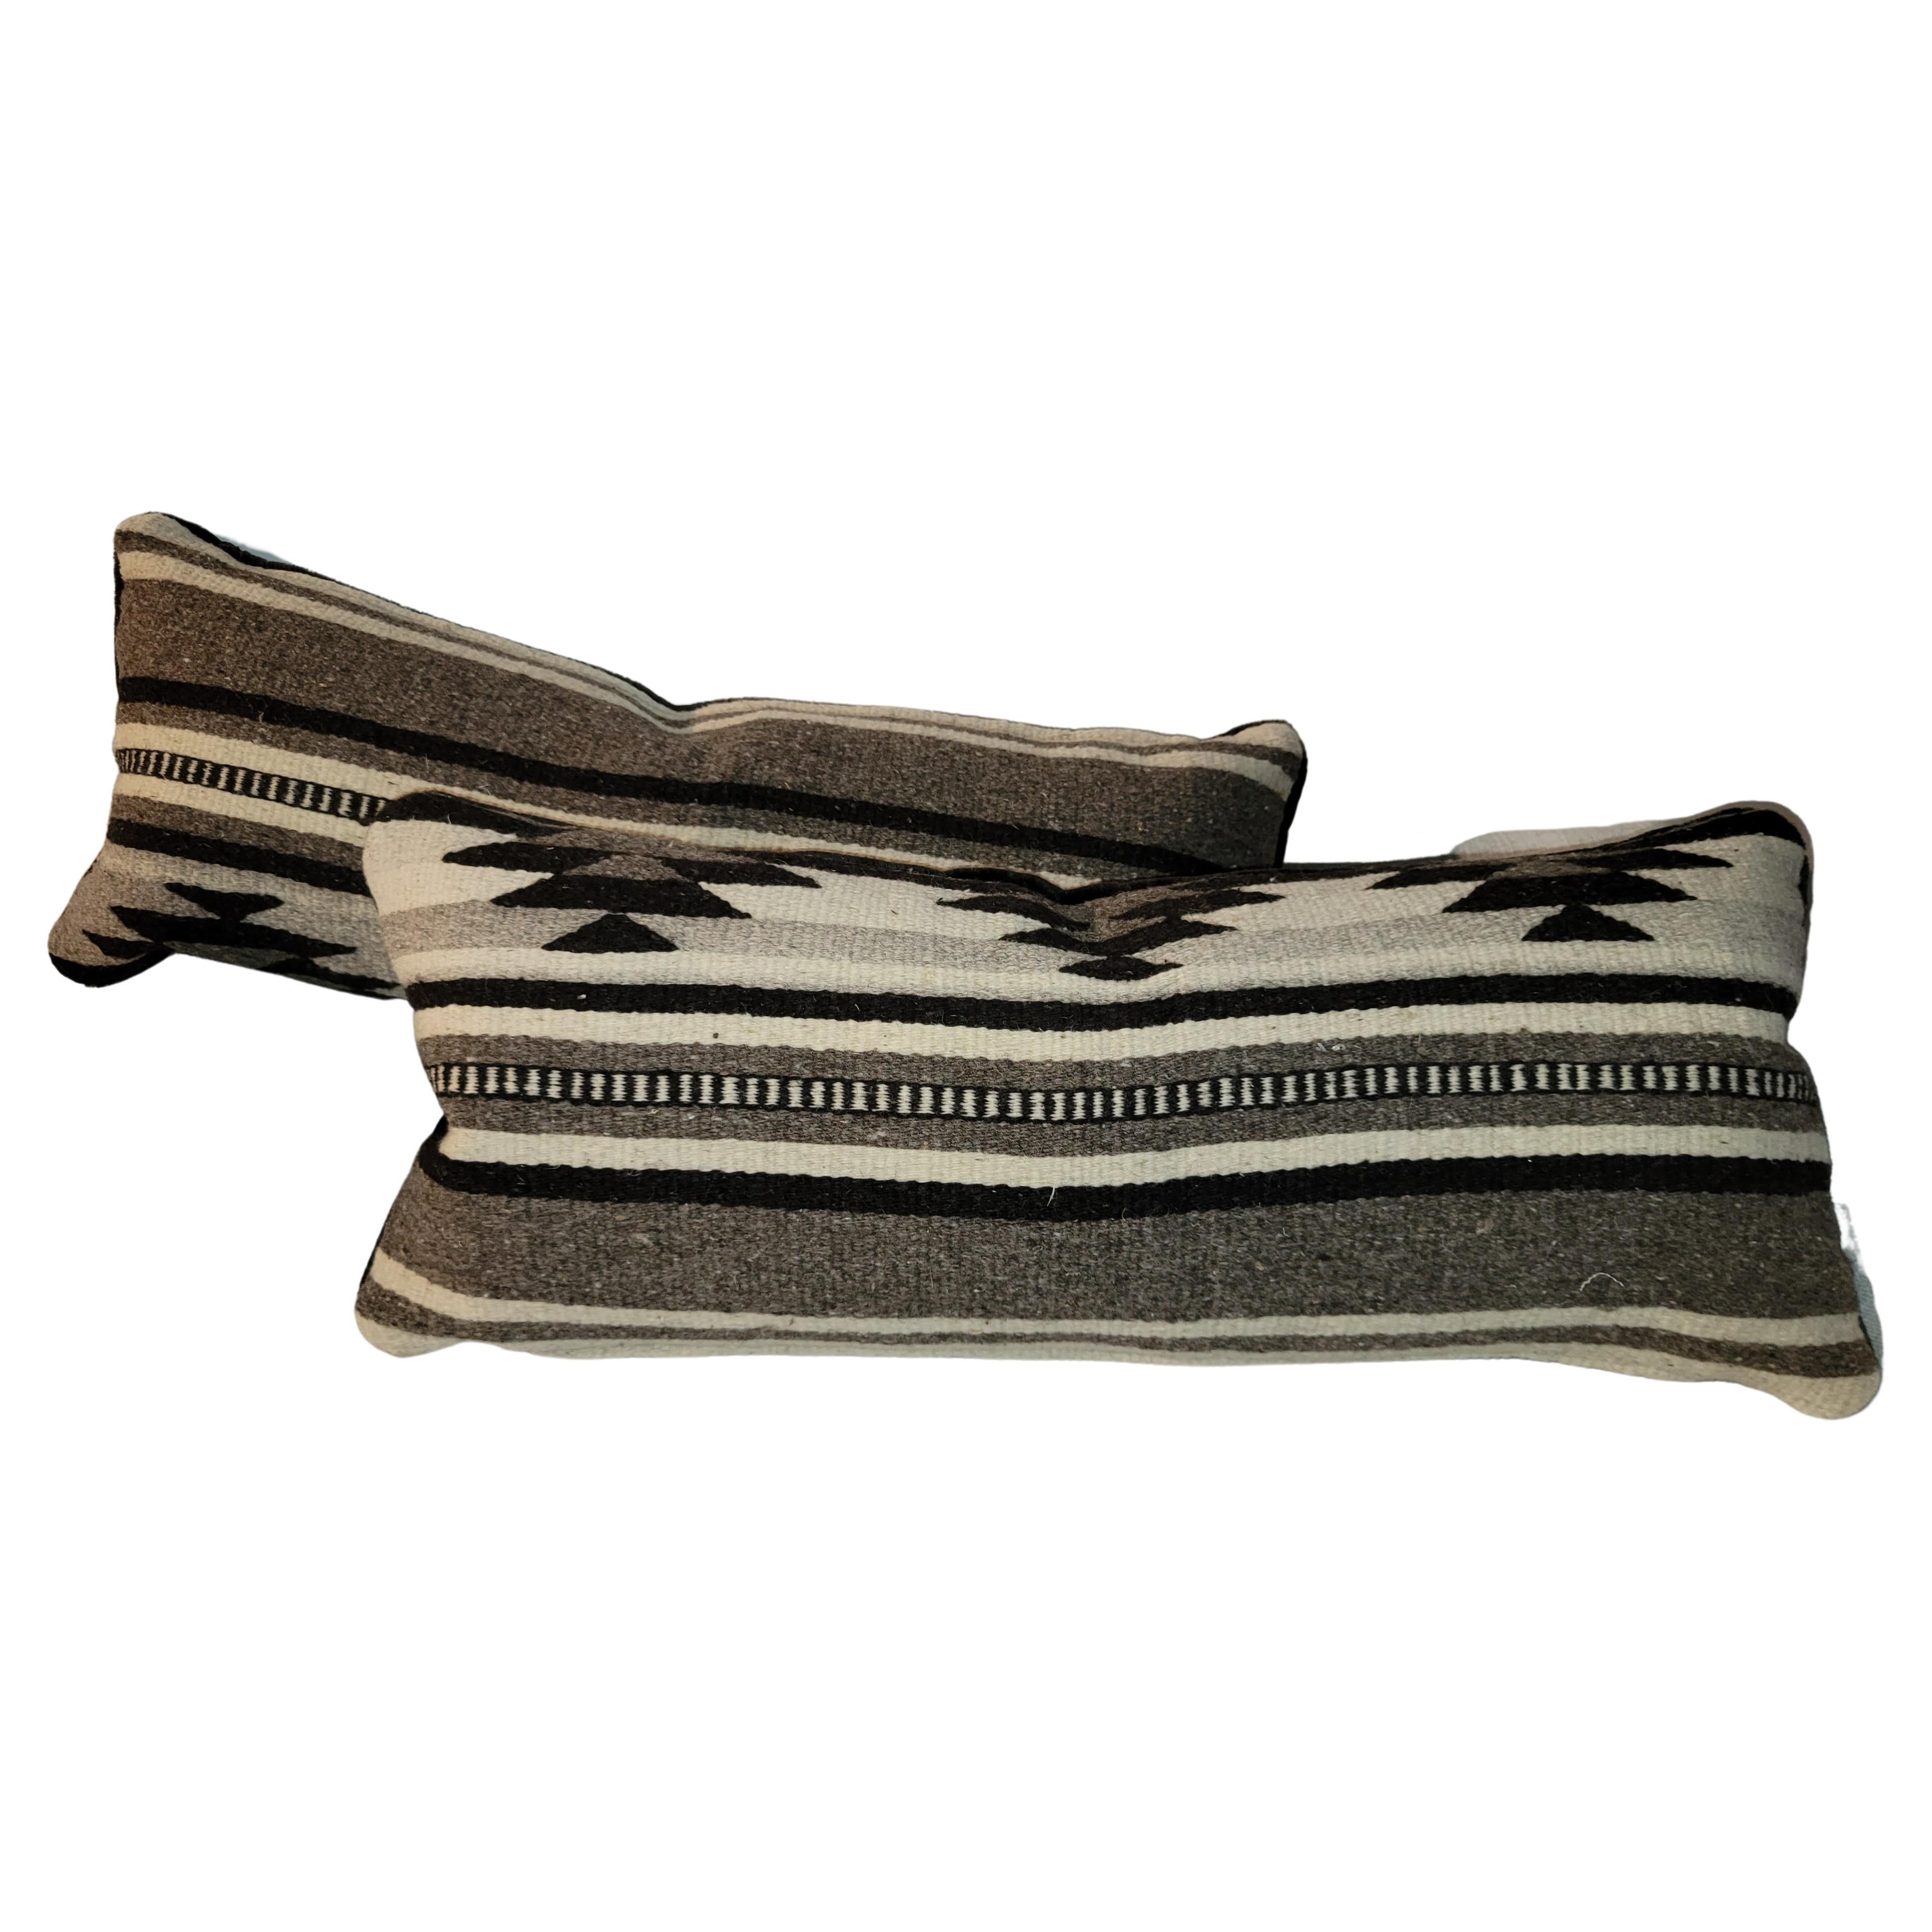 Pair of Indian Weaving Bolster Pillows. Black backing. Feather and down inserts. Zippered casing.